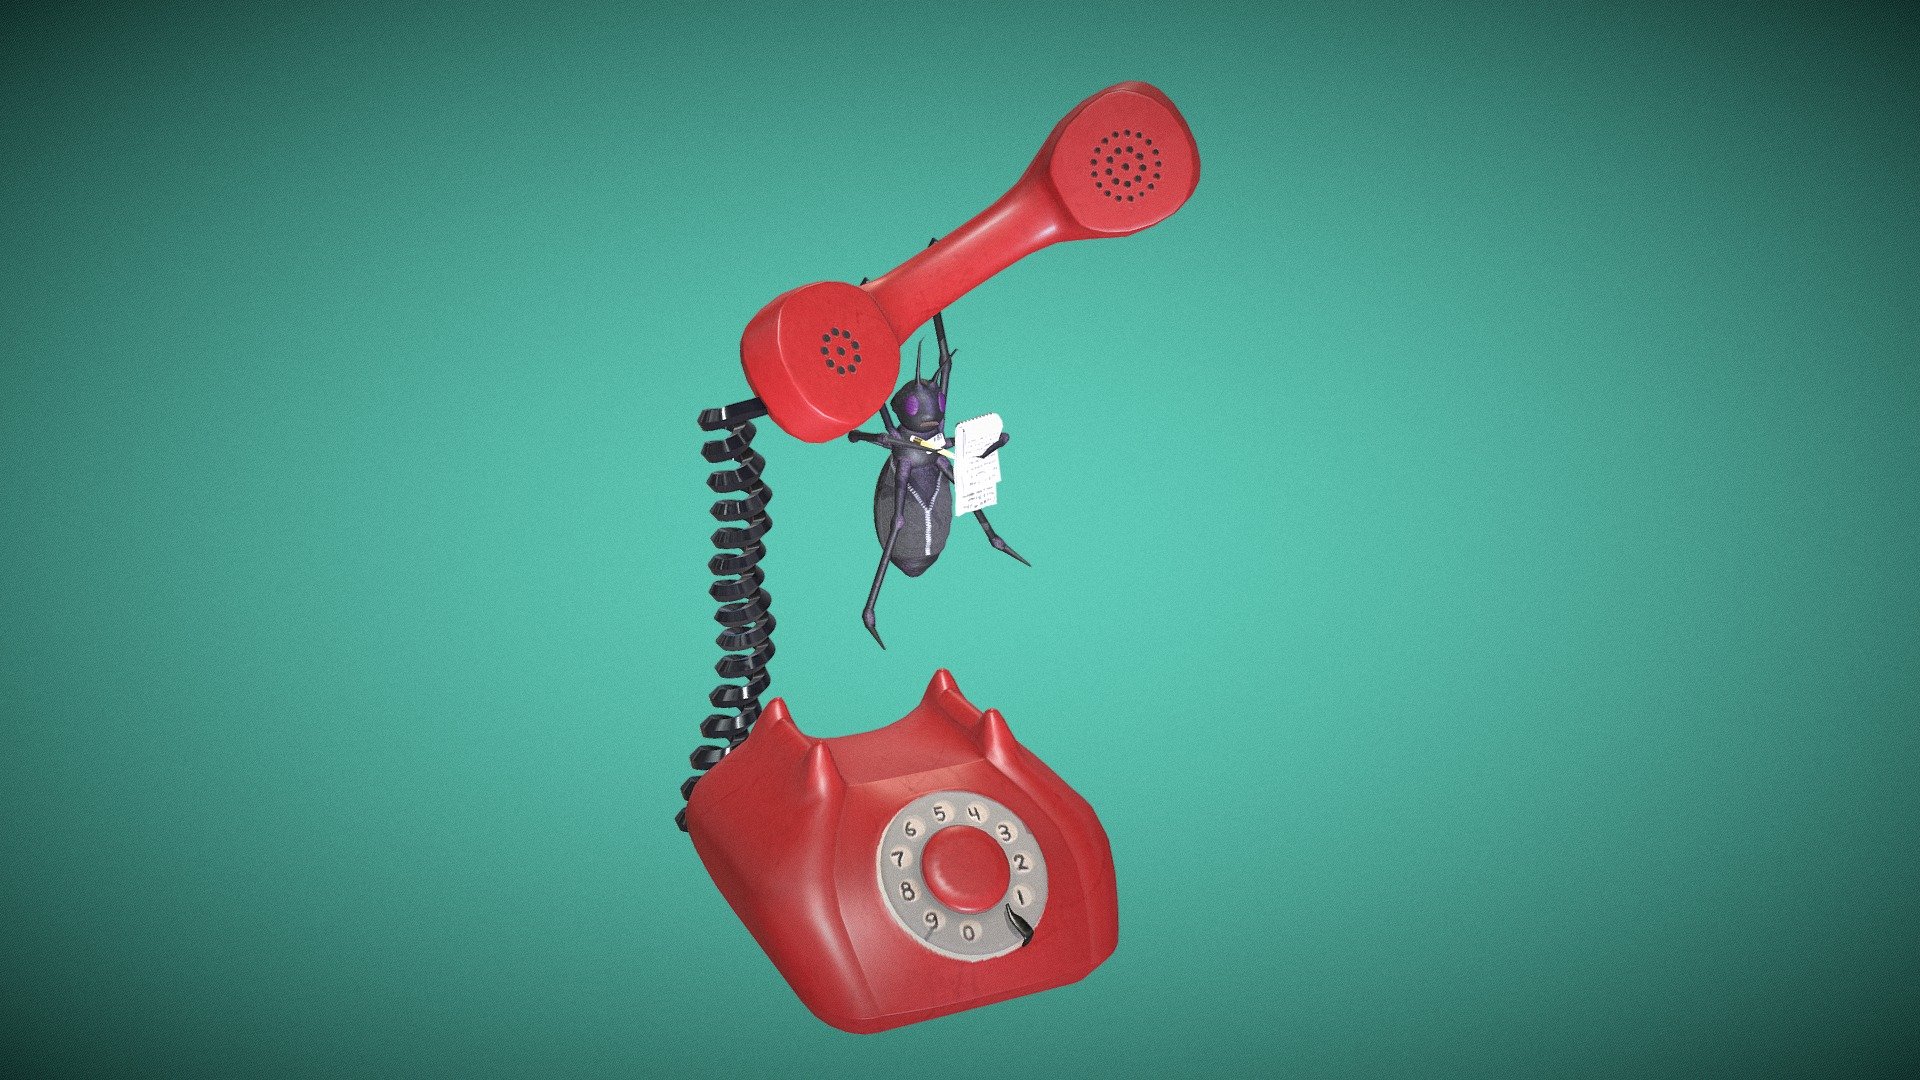 SketchfabWeeklyChallenge - Week 14 - Bug

I had my suspicions that the phone was bugged but now I'm positive!

He's a trained operative of the Federal Bug Inspectors! - Bugged Phone - 3D model by parjen 3d model